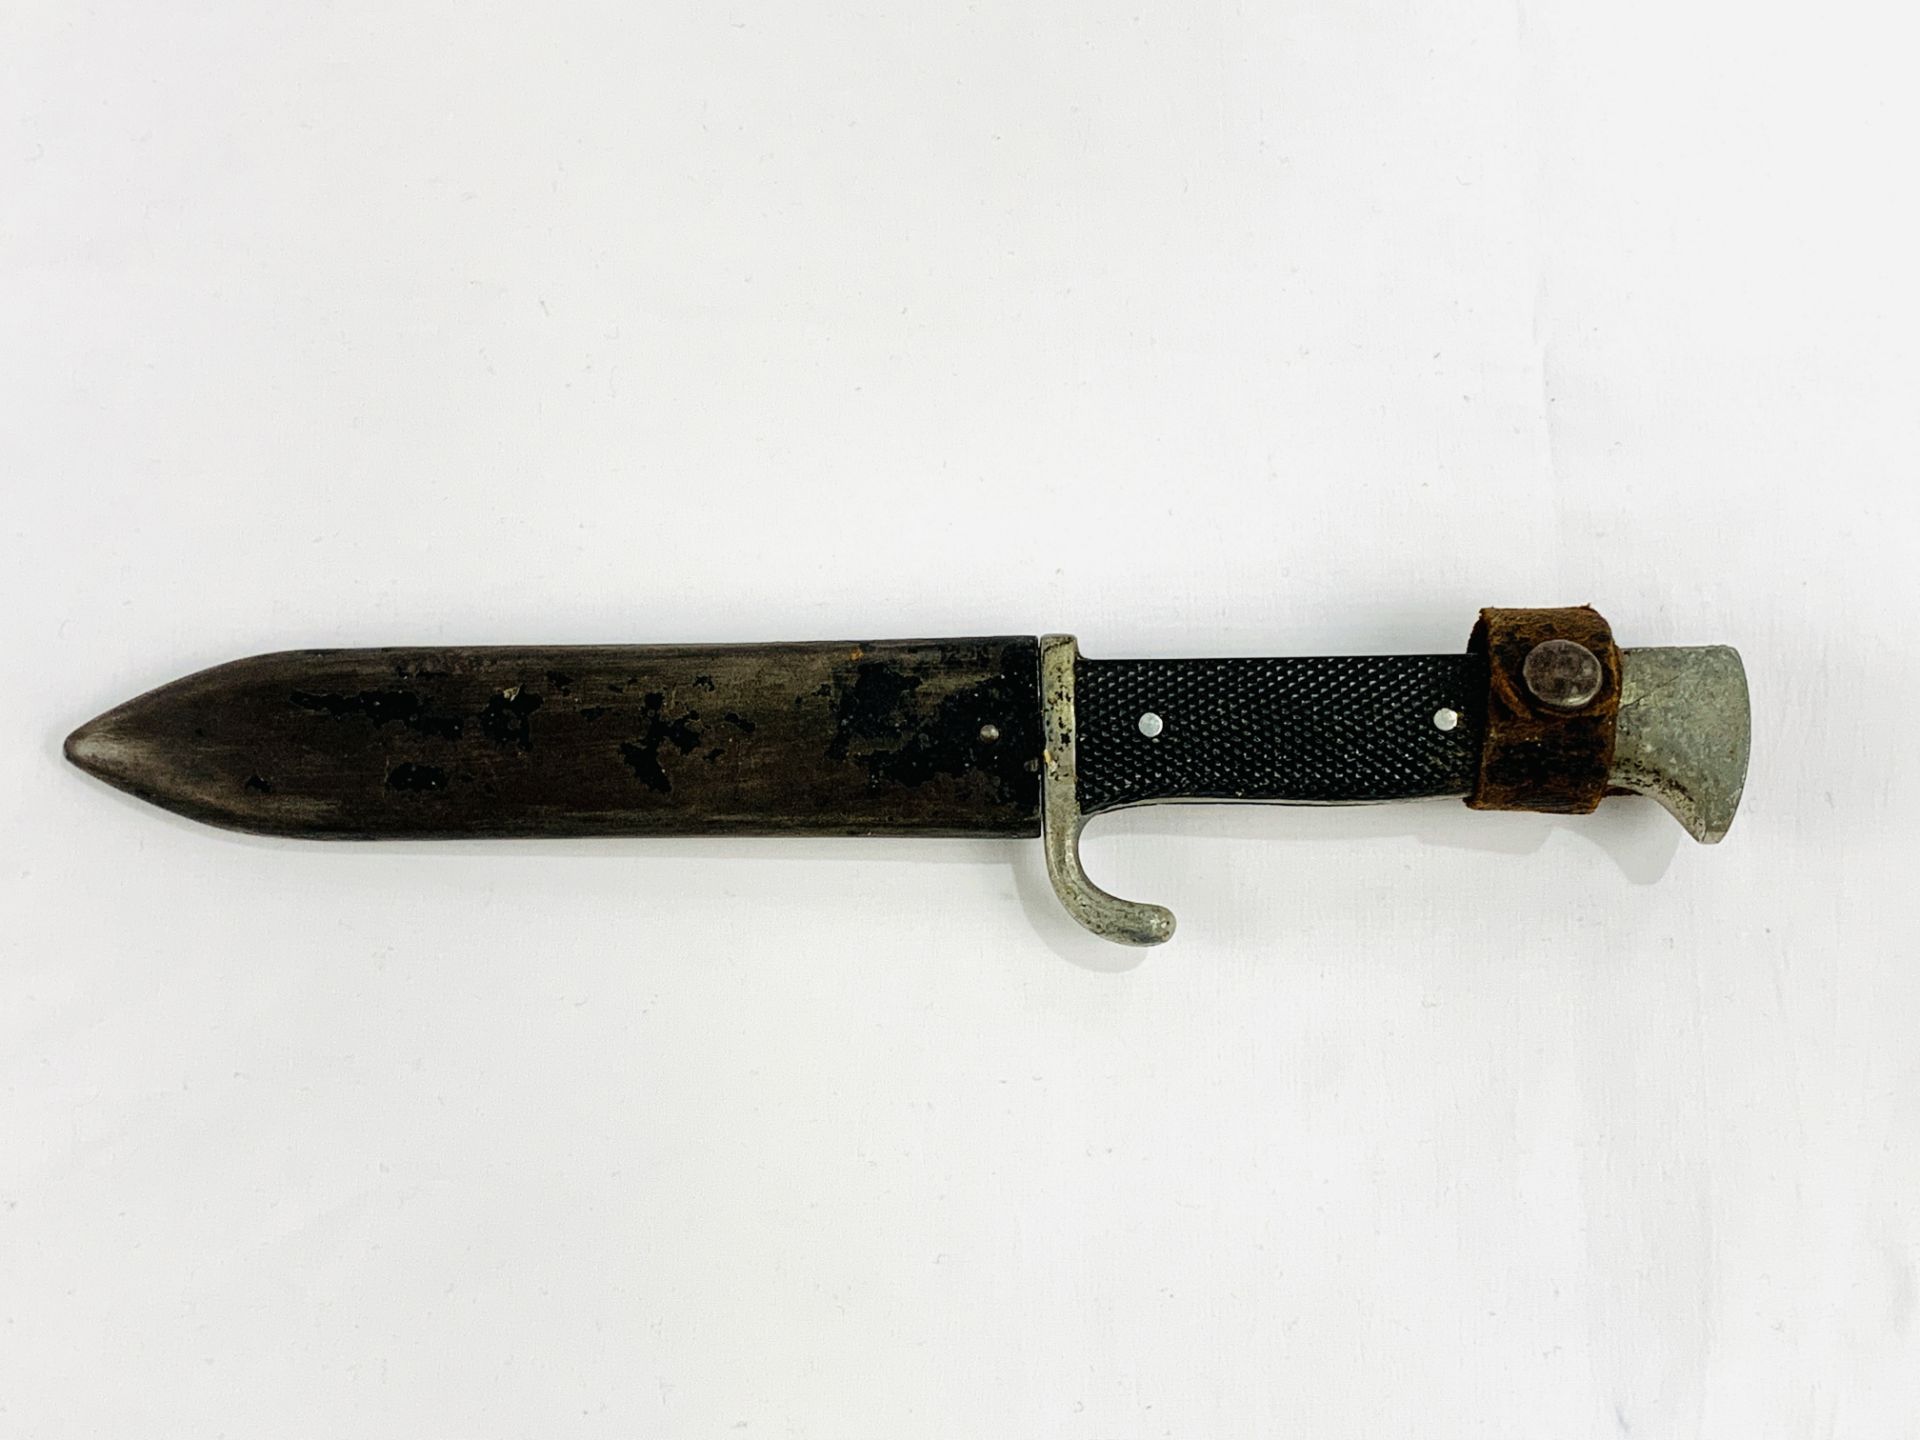 German Third Reich Hitler Youth pattern sheath knife, 1938 - Image 4 of 6